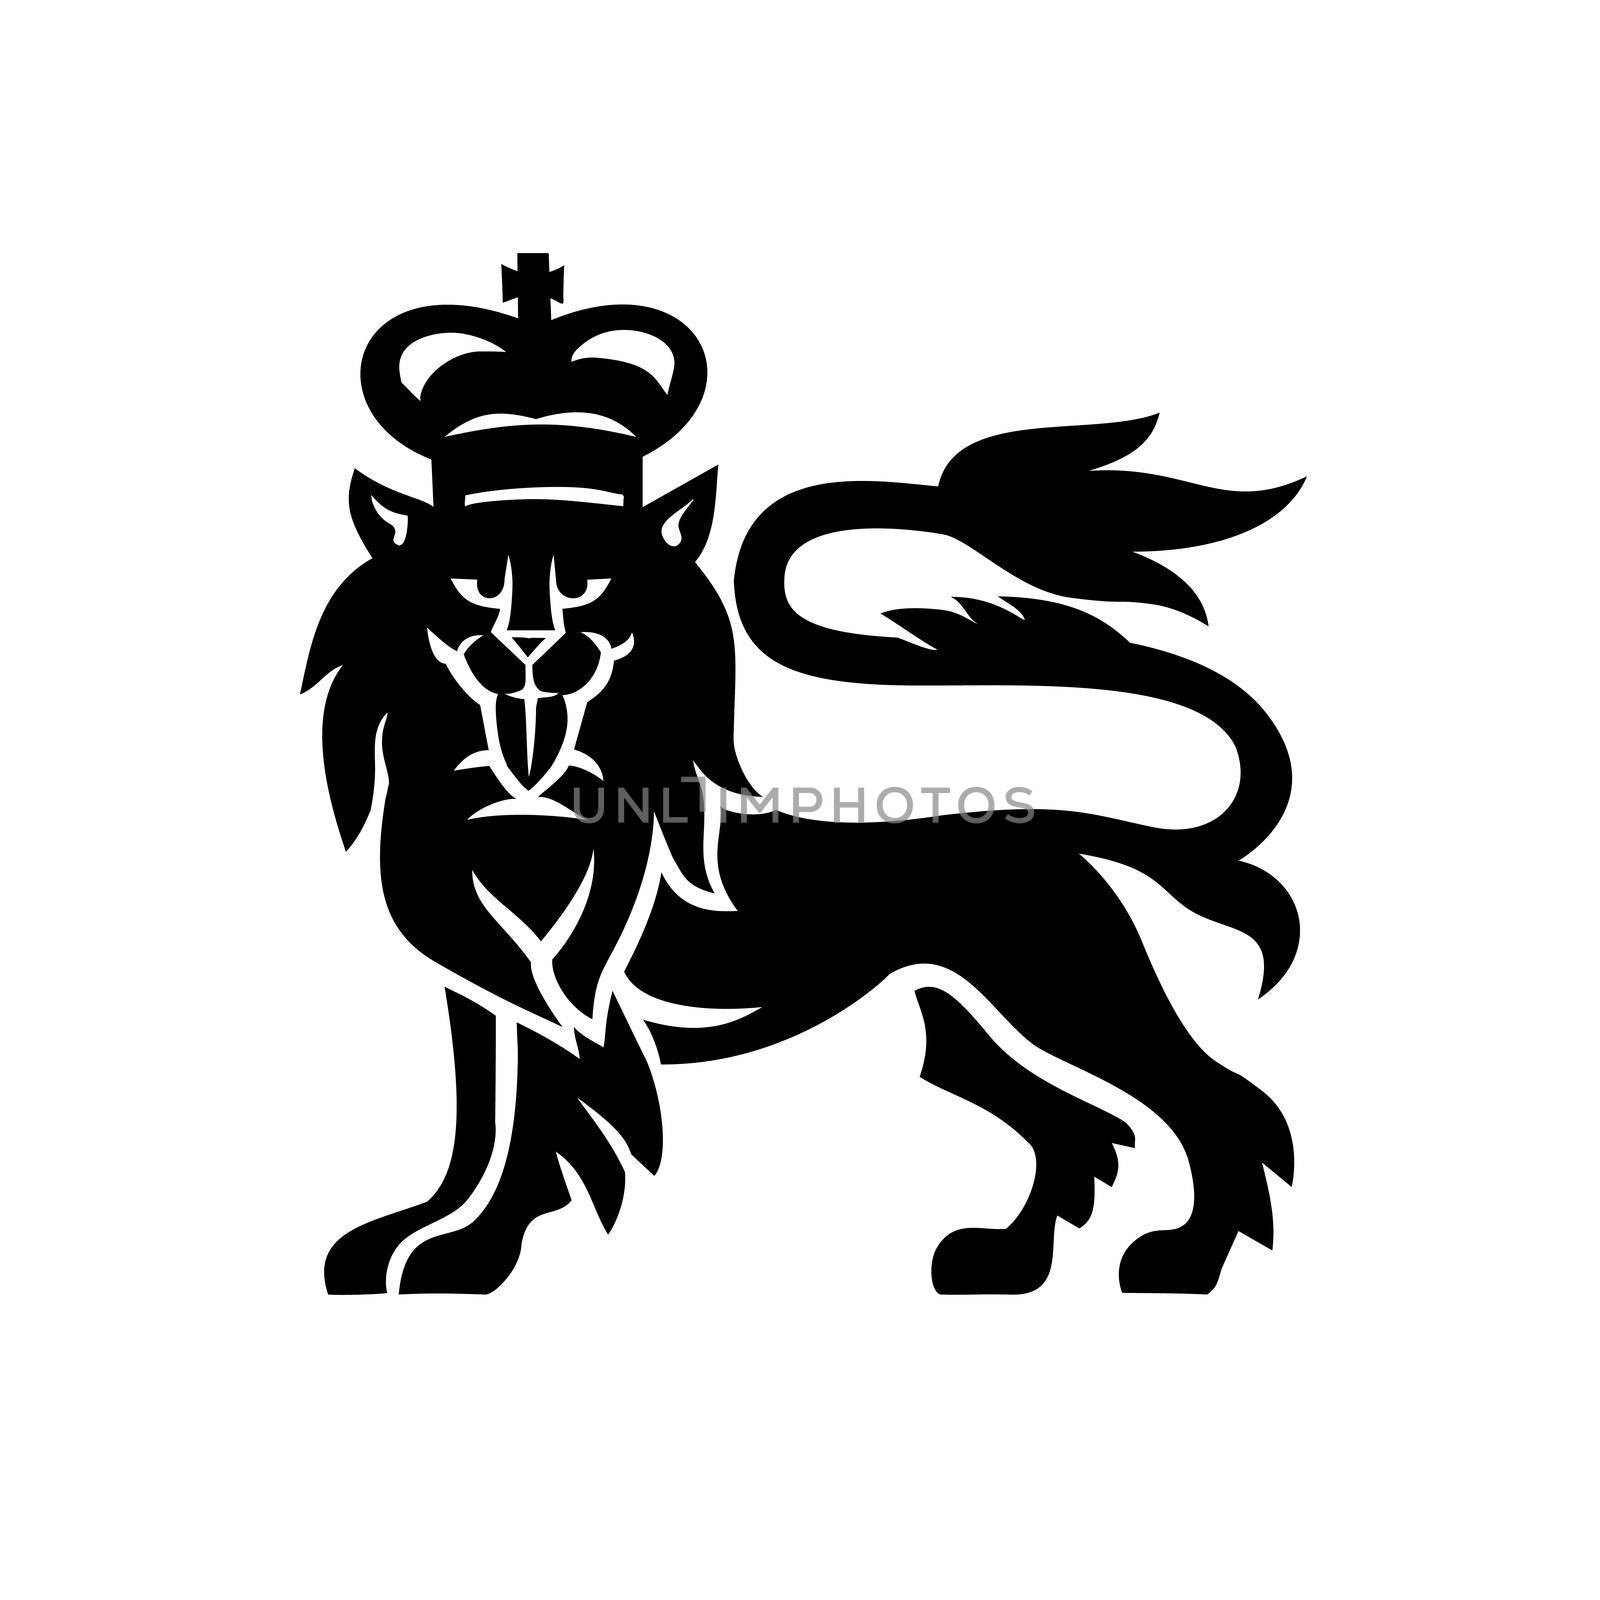 Military badge illustration of English or British lion wearing a royal crown viewed from side looking to front on isolated white background done in black and white retro style.